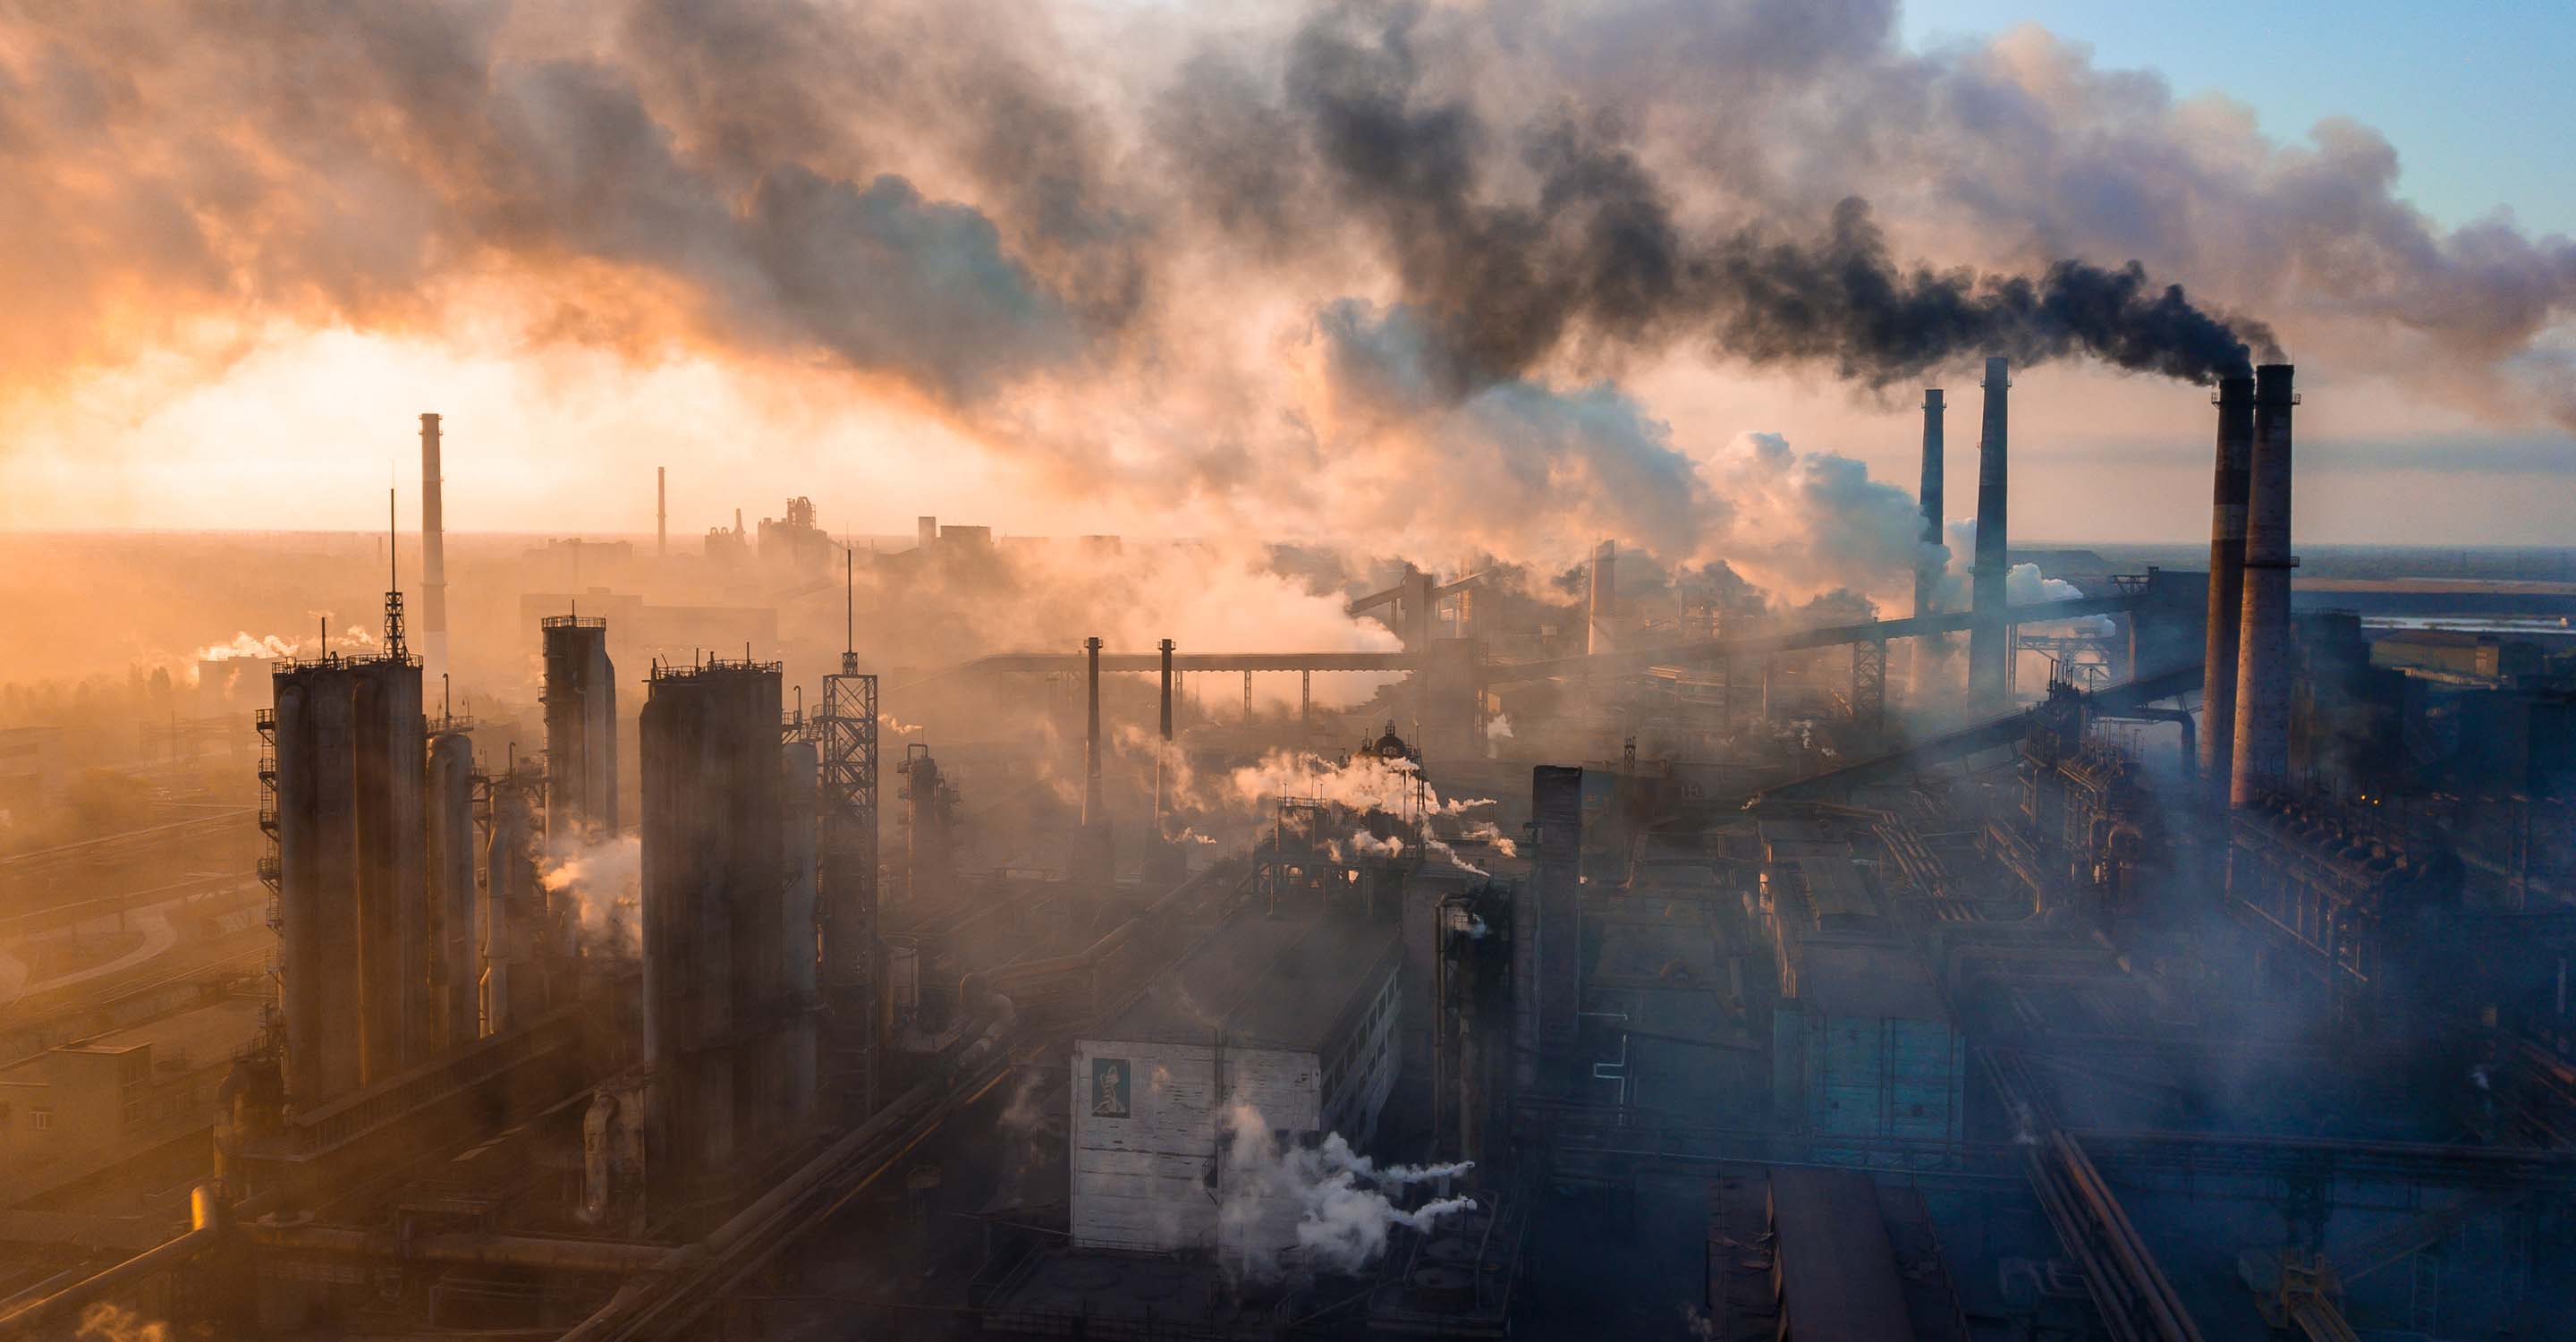 Does air pollution cause climate change?